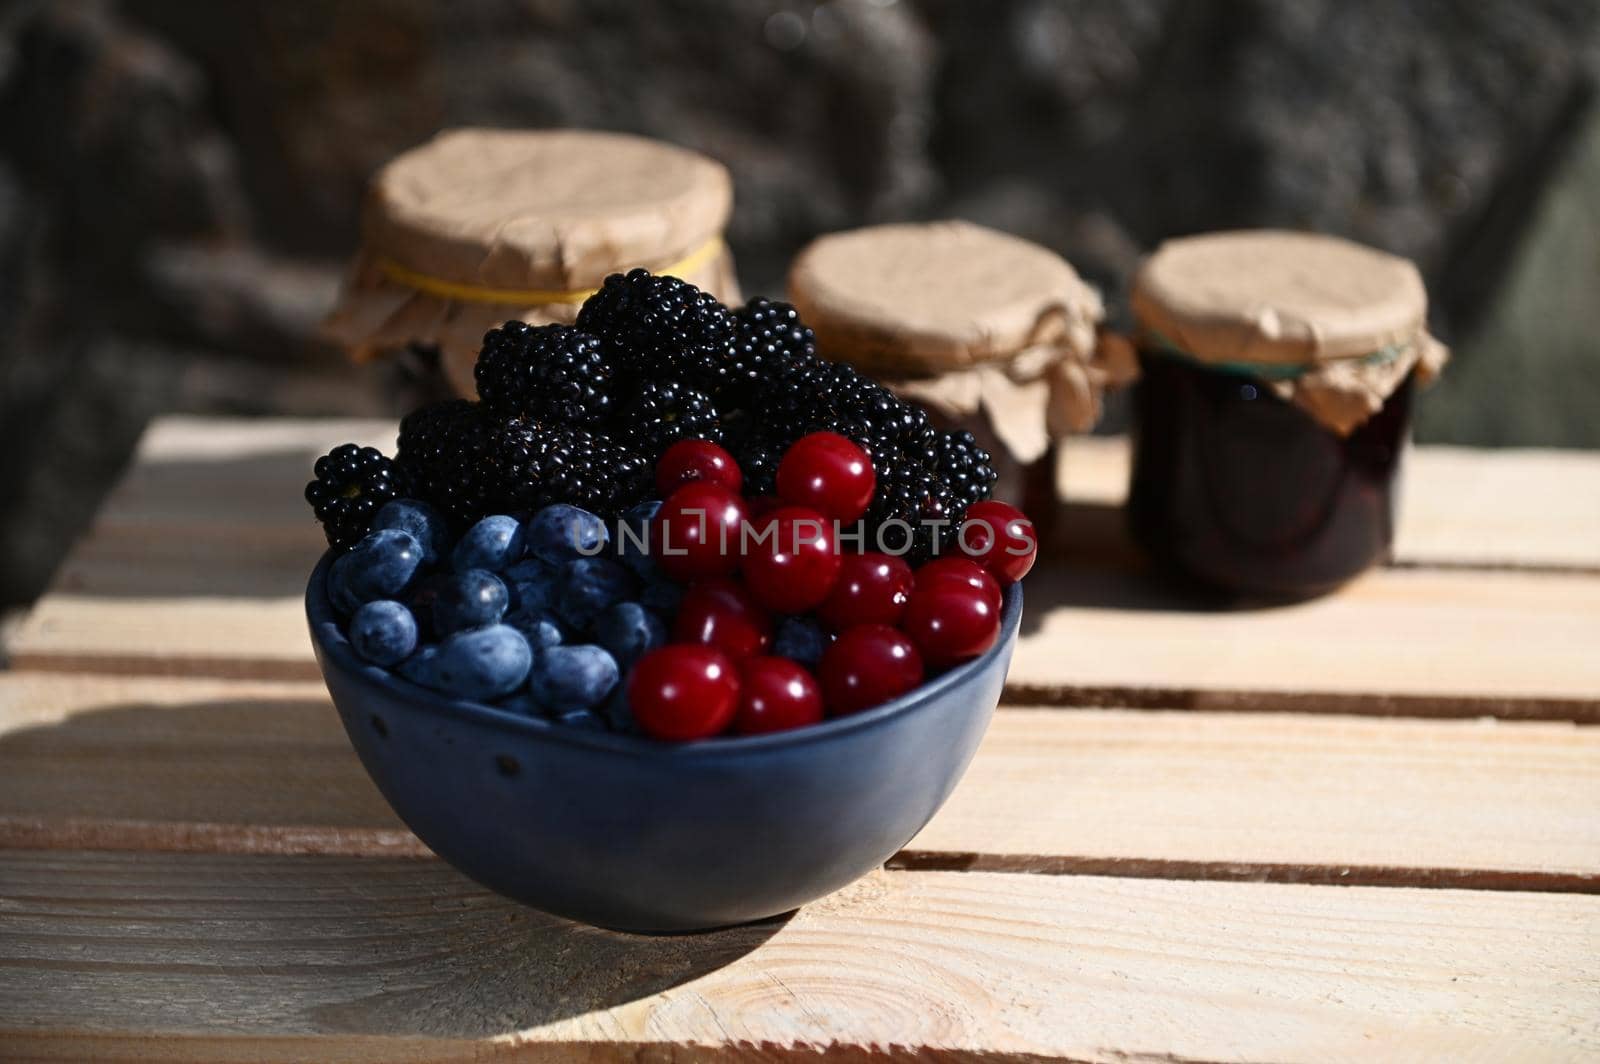 Close-up of a blue ceramic bowl with ripe cherry berries, blueberries and blackberries in a wooden box against the background of blurry assorted fruit jams in jars. Organic farm and canning concept